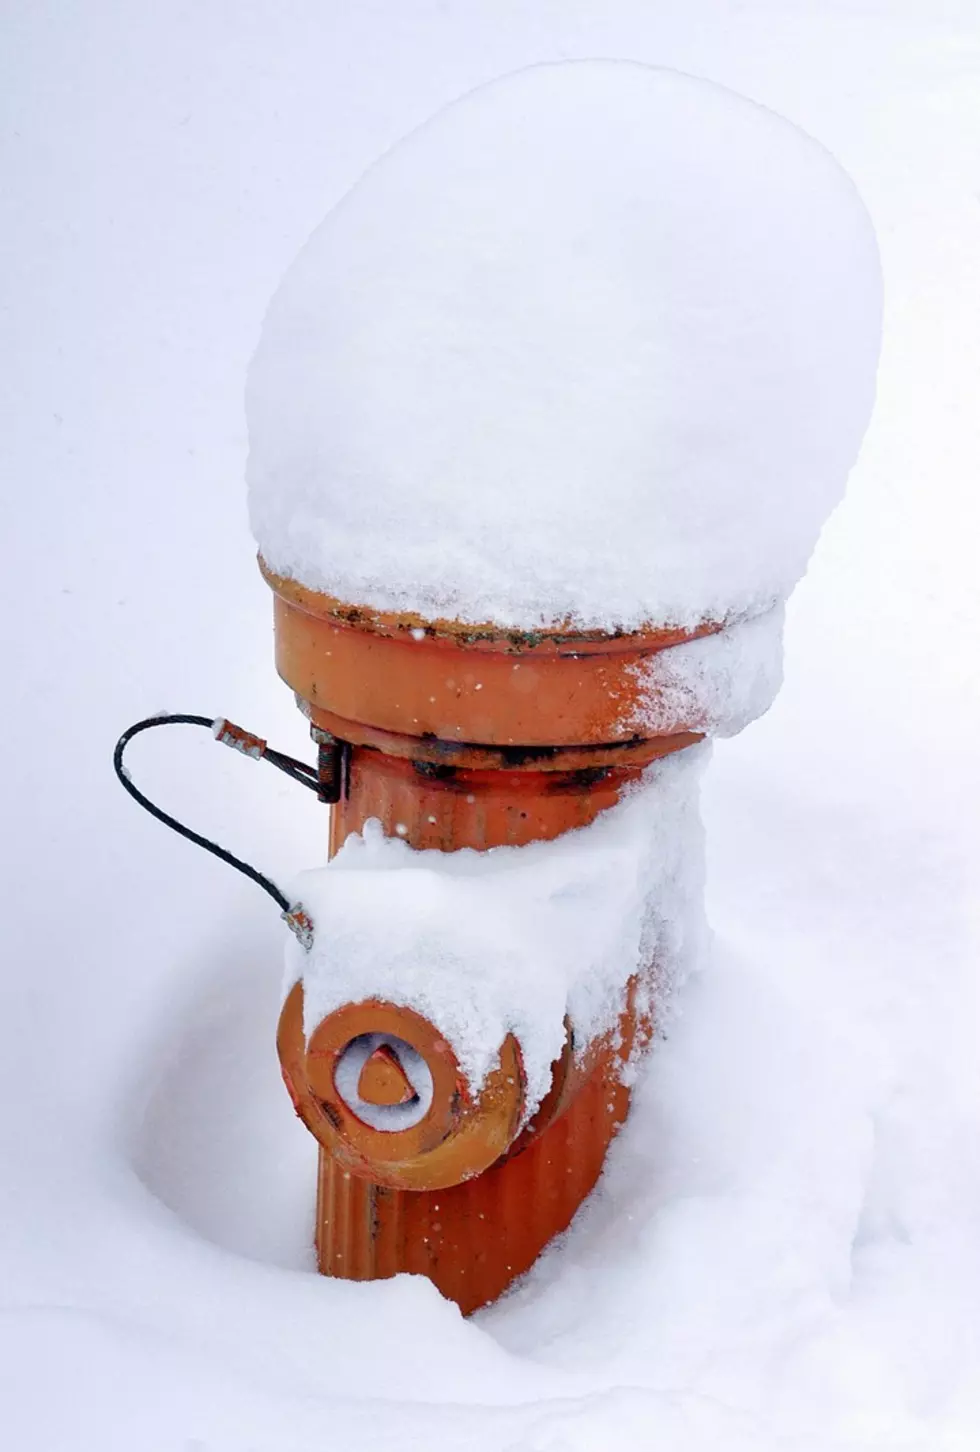 After The Storm: Are Fire Hydrants Near Your Home, Clear Of Snow?